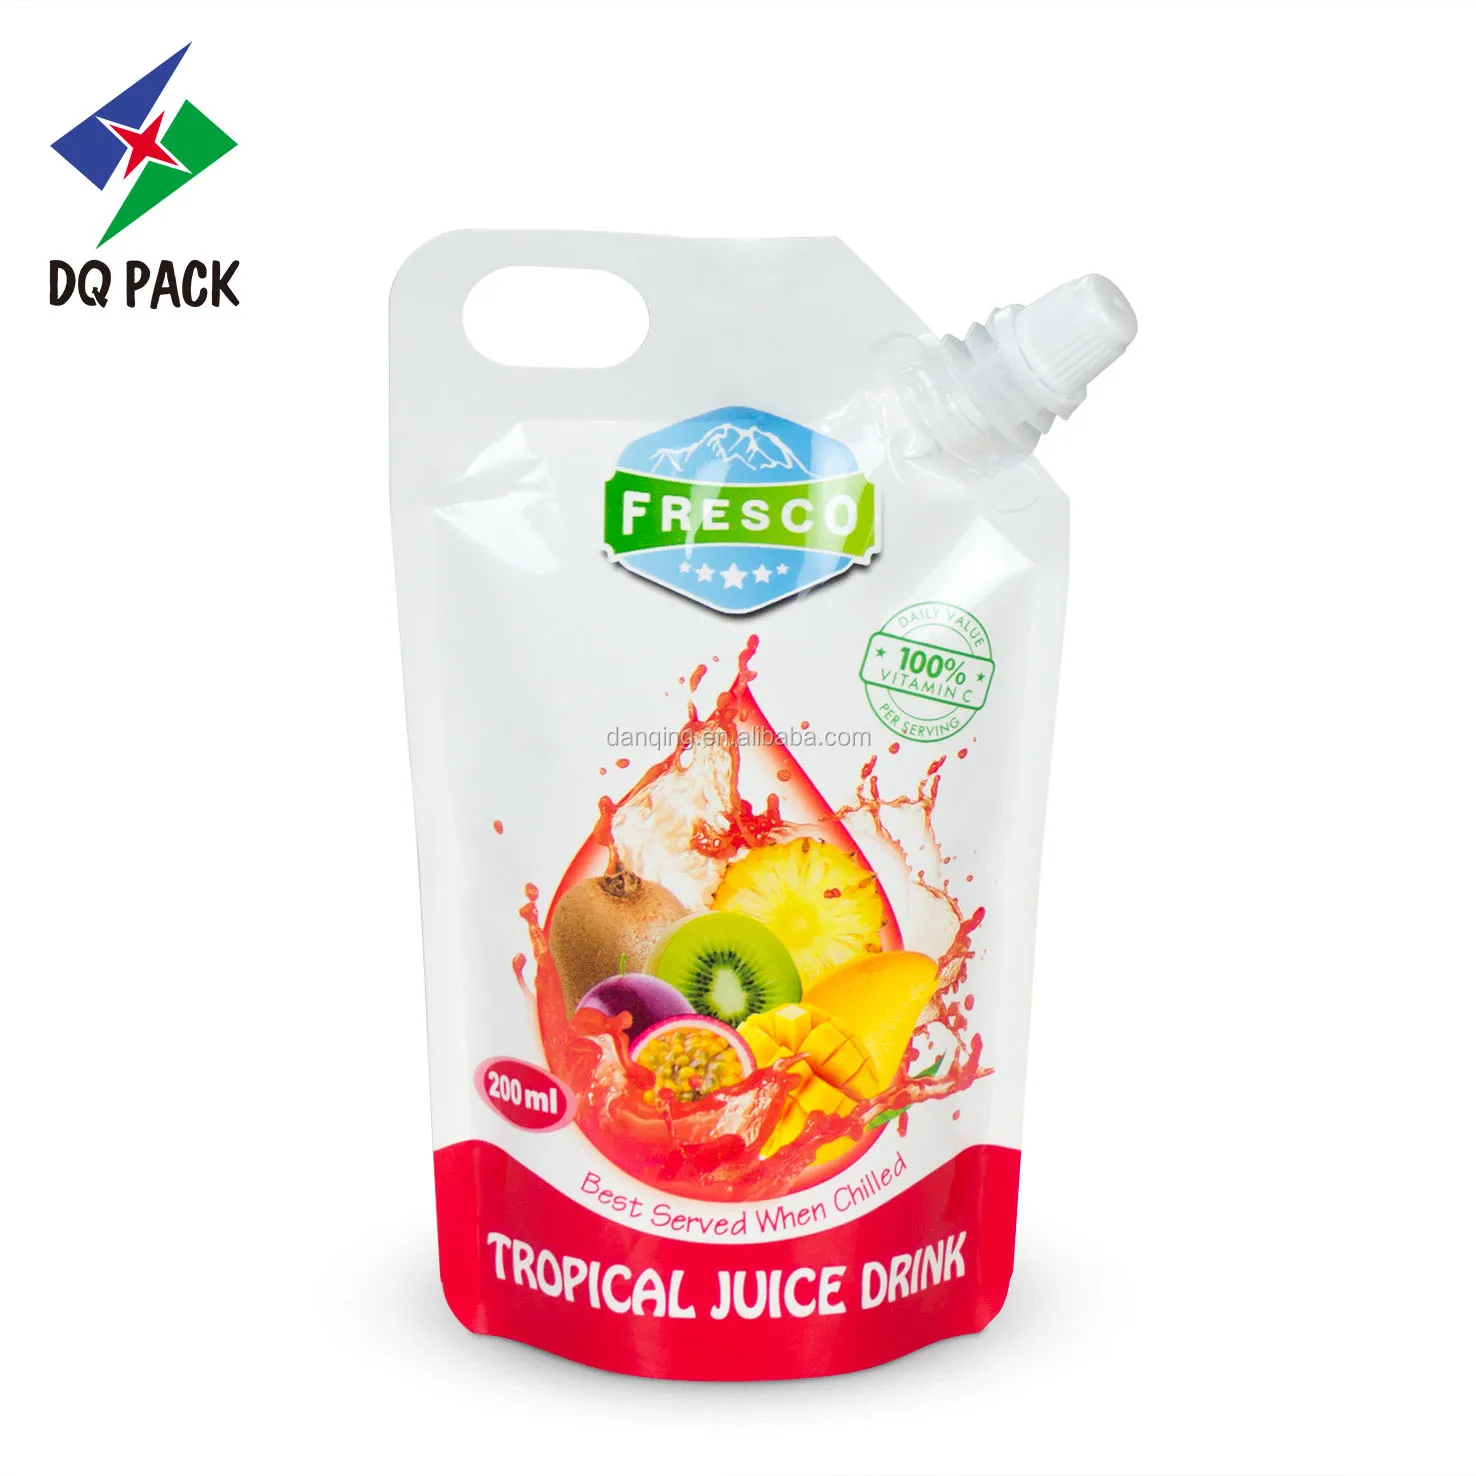 DQ PACK Custom Printed Zipper Clear Drink Reusable Food Spout Pouch Plastic Liquid Stand Up Pouch With Spout